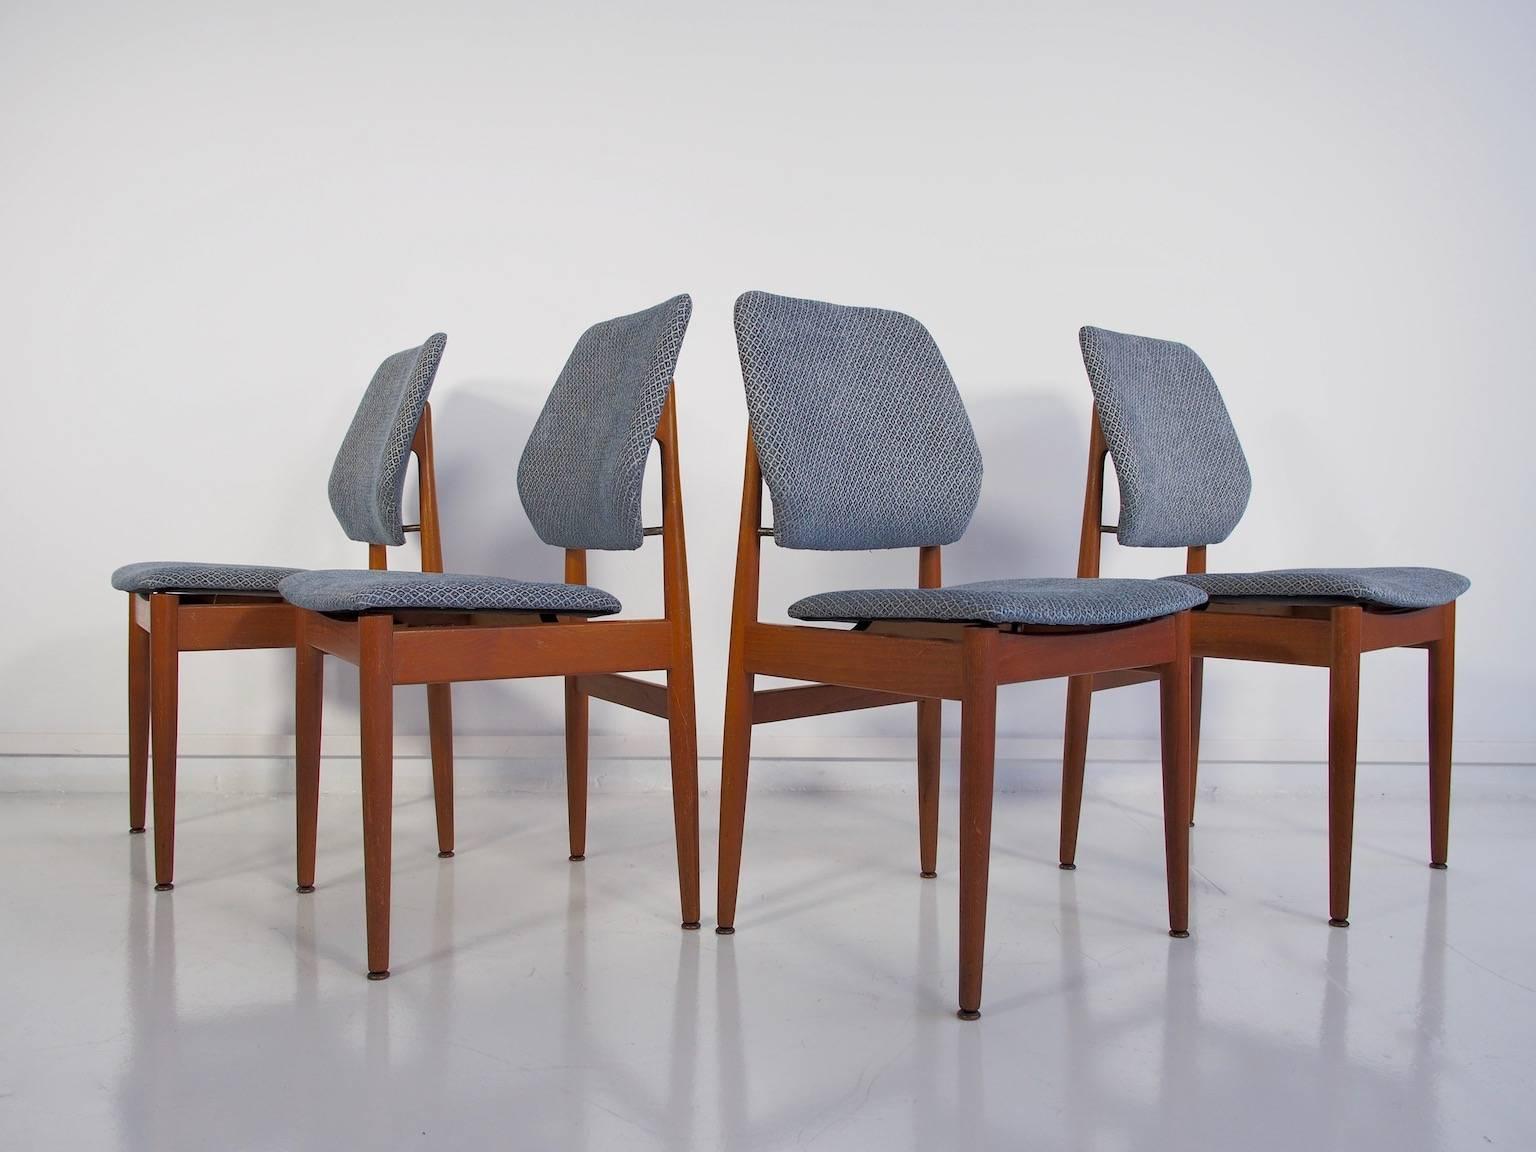 Set of six dining chairs with teak frame. Newly upholstered in blue and grey fabric with diamond pattern (composition: 64% linen, 24% viscose, 12% cotton). Marked Casala.